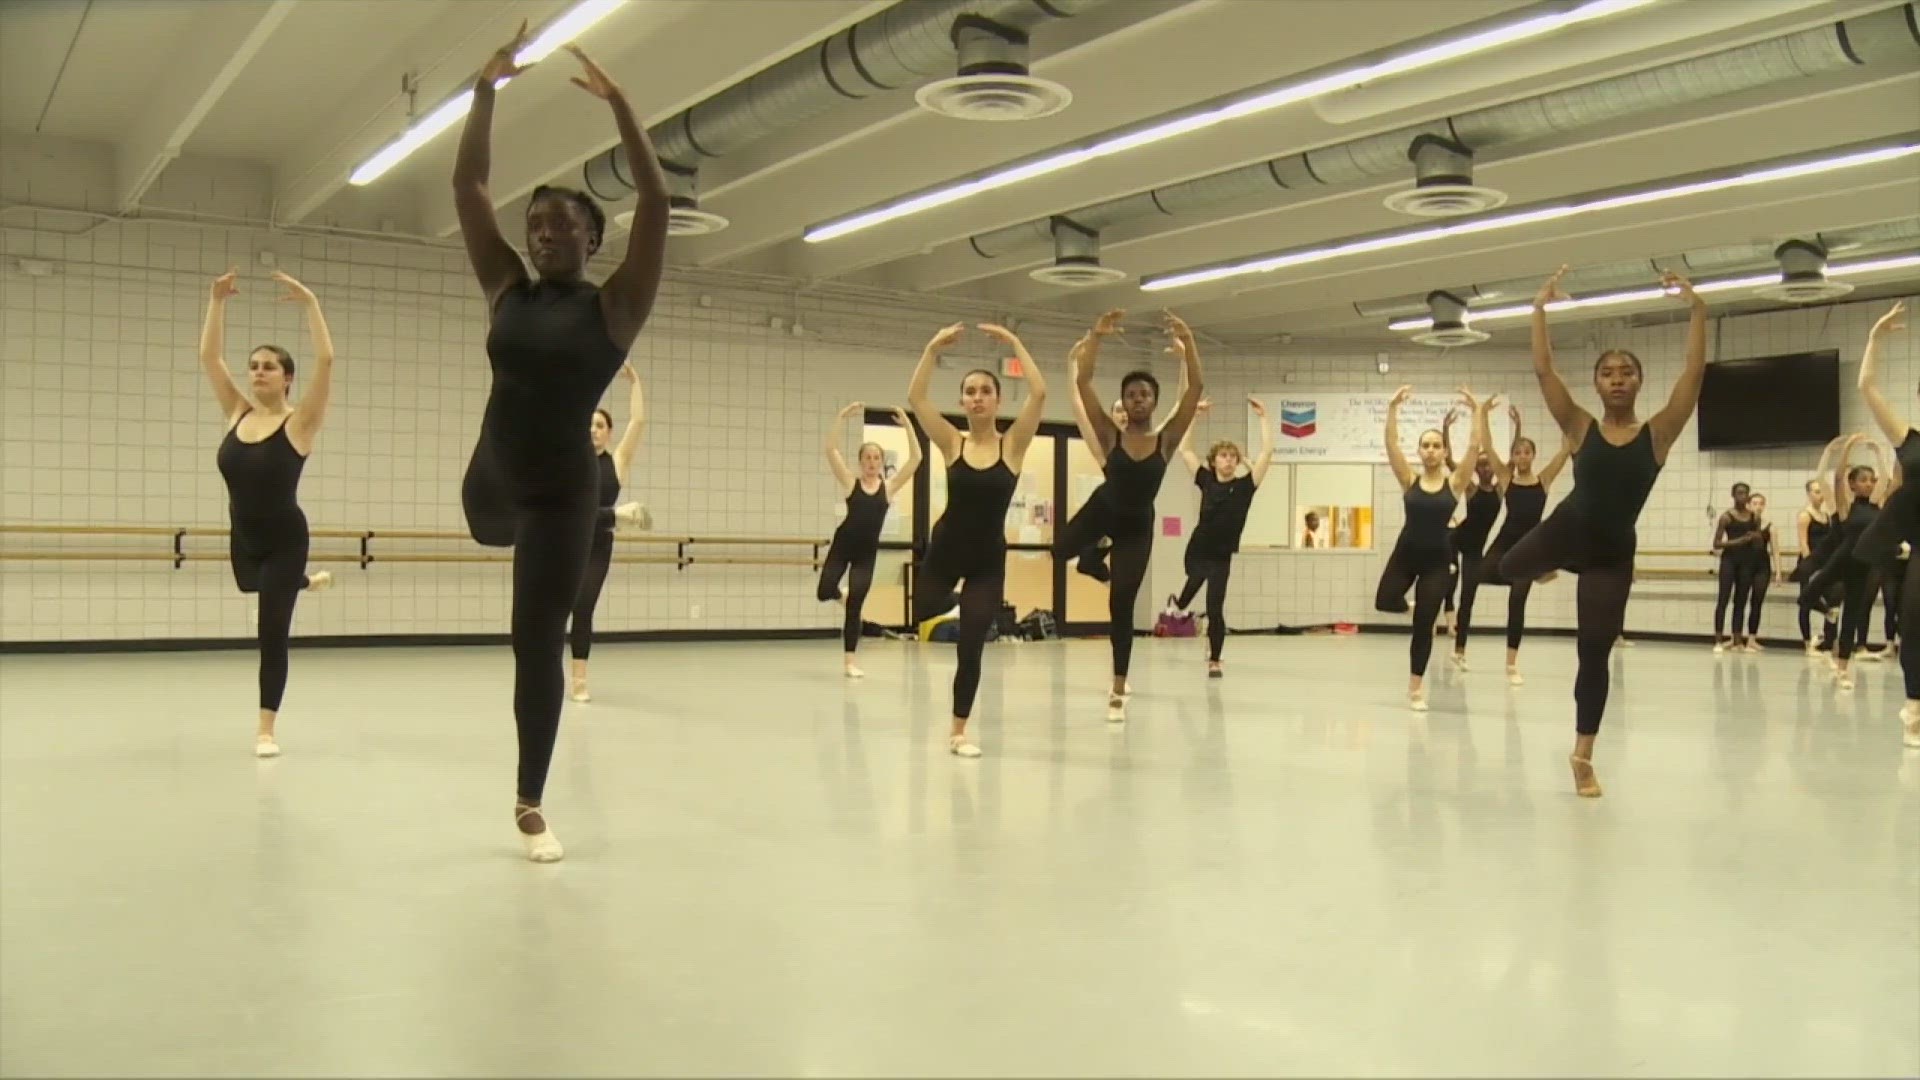 Eric Paulsen takes a behind-the-scenes look at the Tegna Grants recipient, the New Orleans Ballet Association.